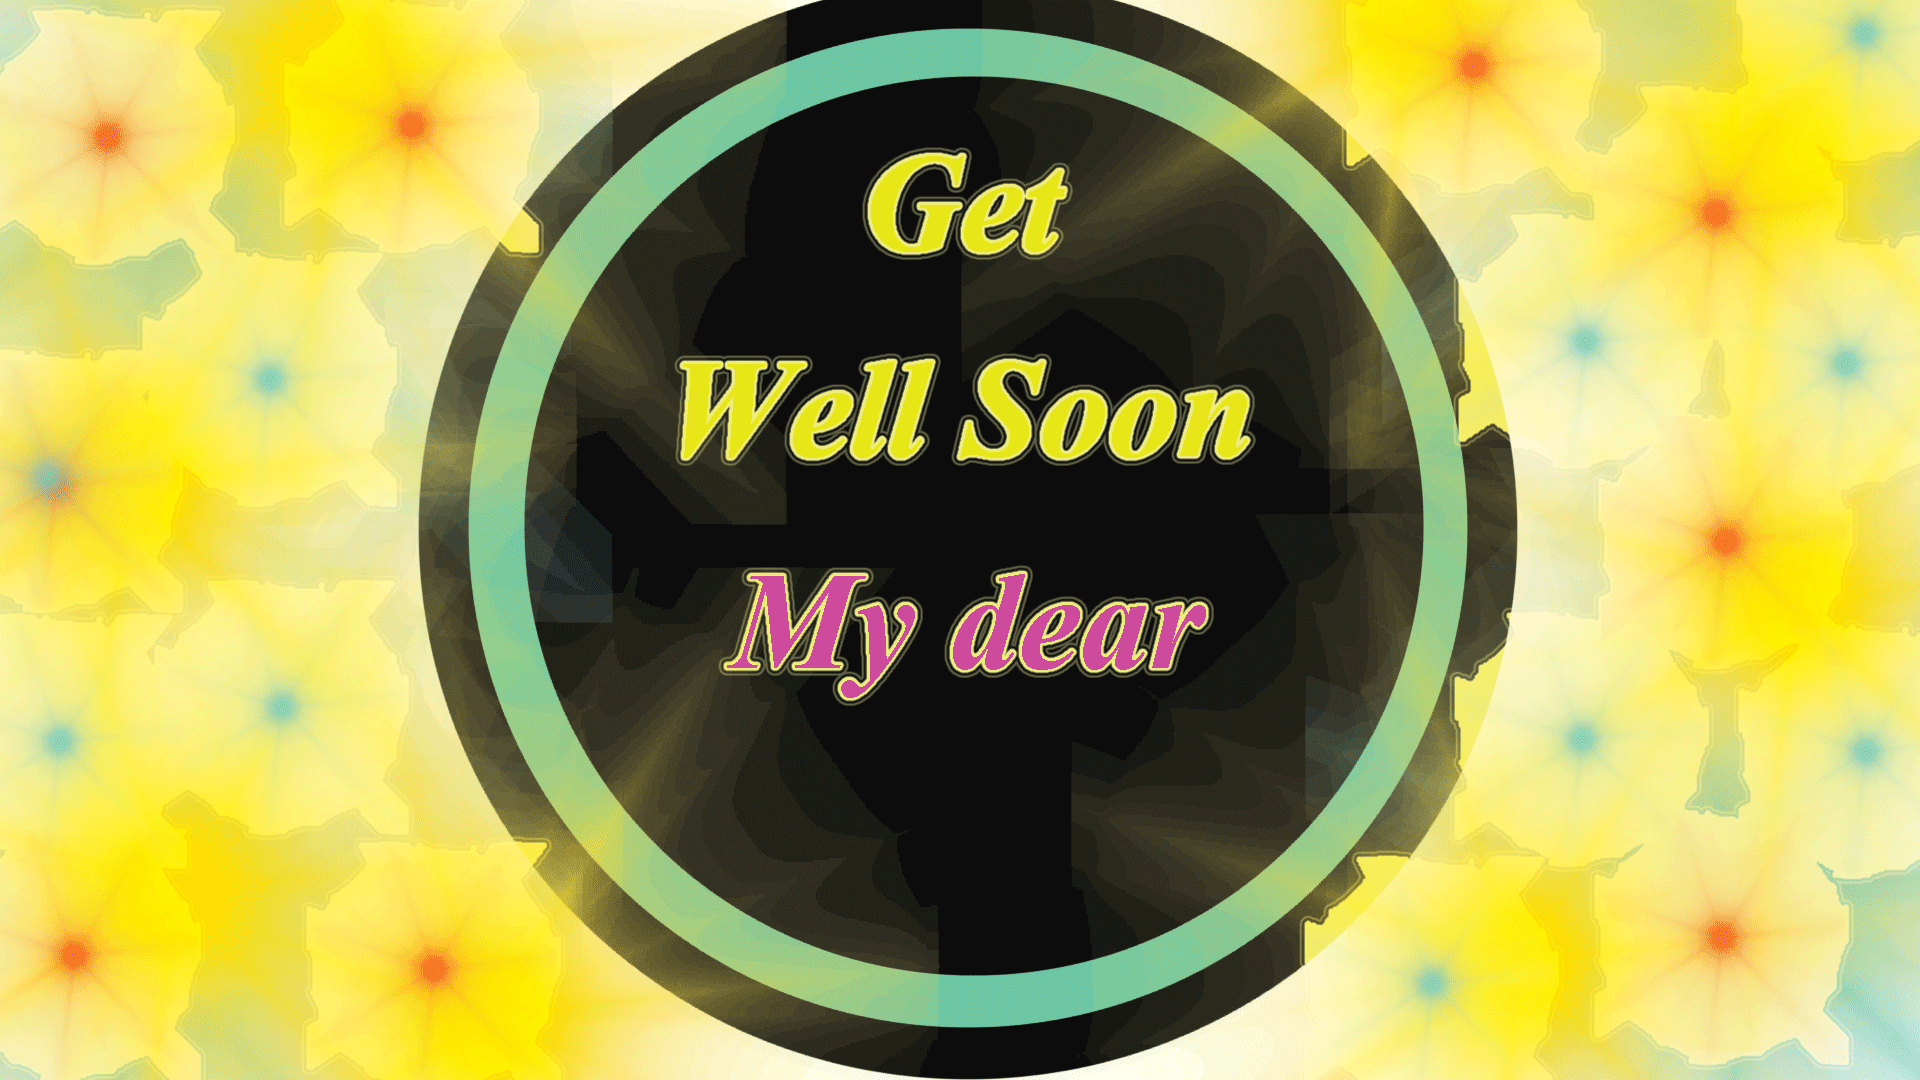 Get well soon image for dear one